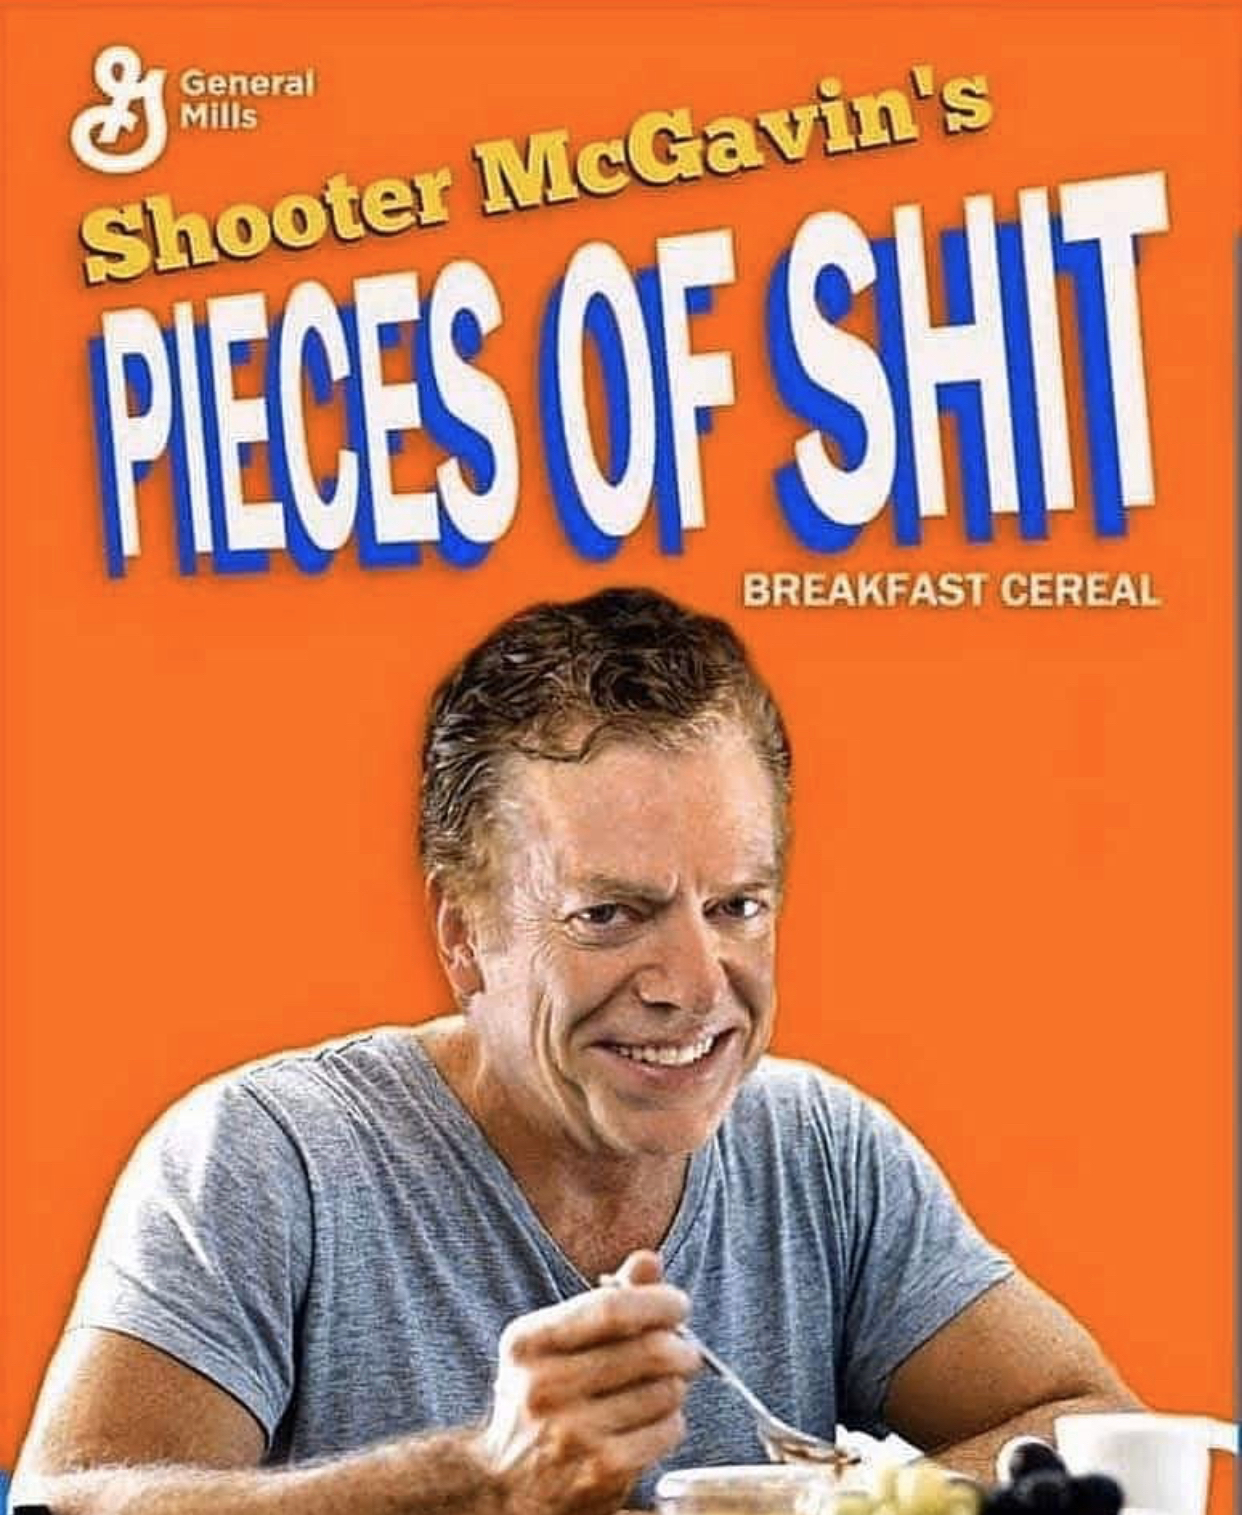 junk food - General Mills Shooter McGavin's Pieces Of Shit Breakfast Cereal